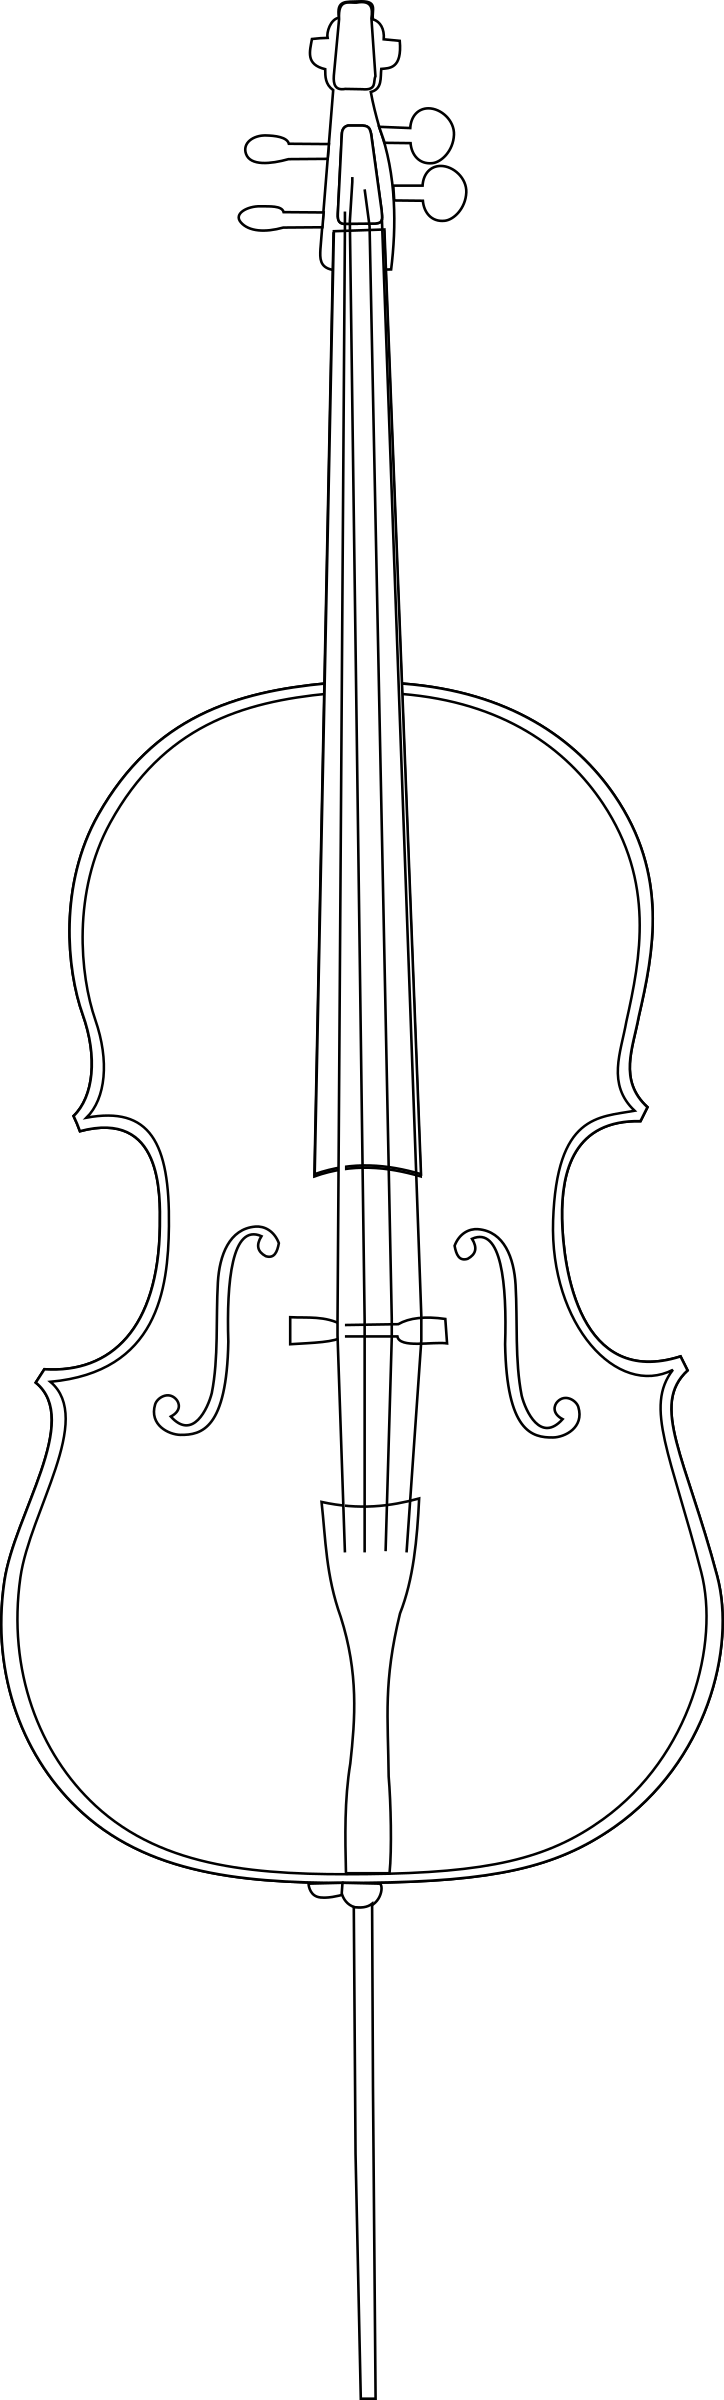 A Drawing Of A Cello